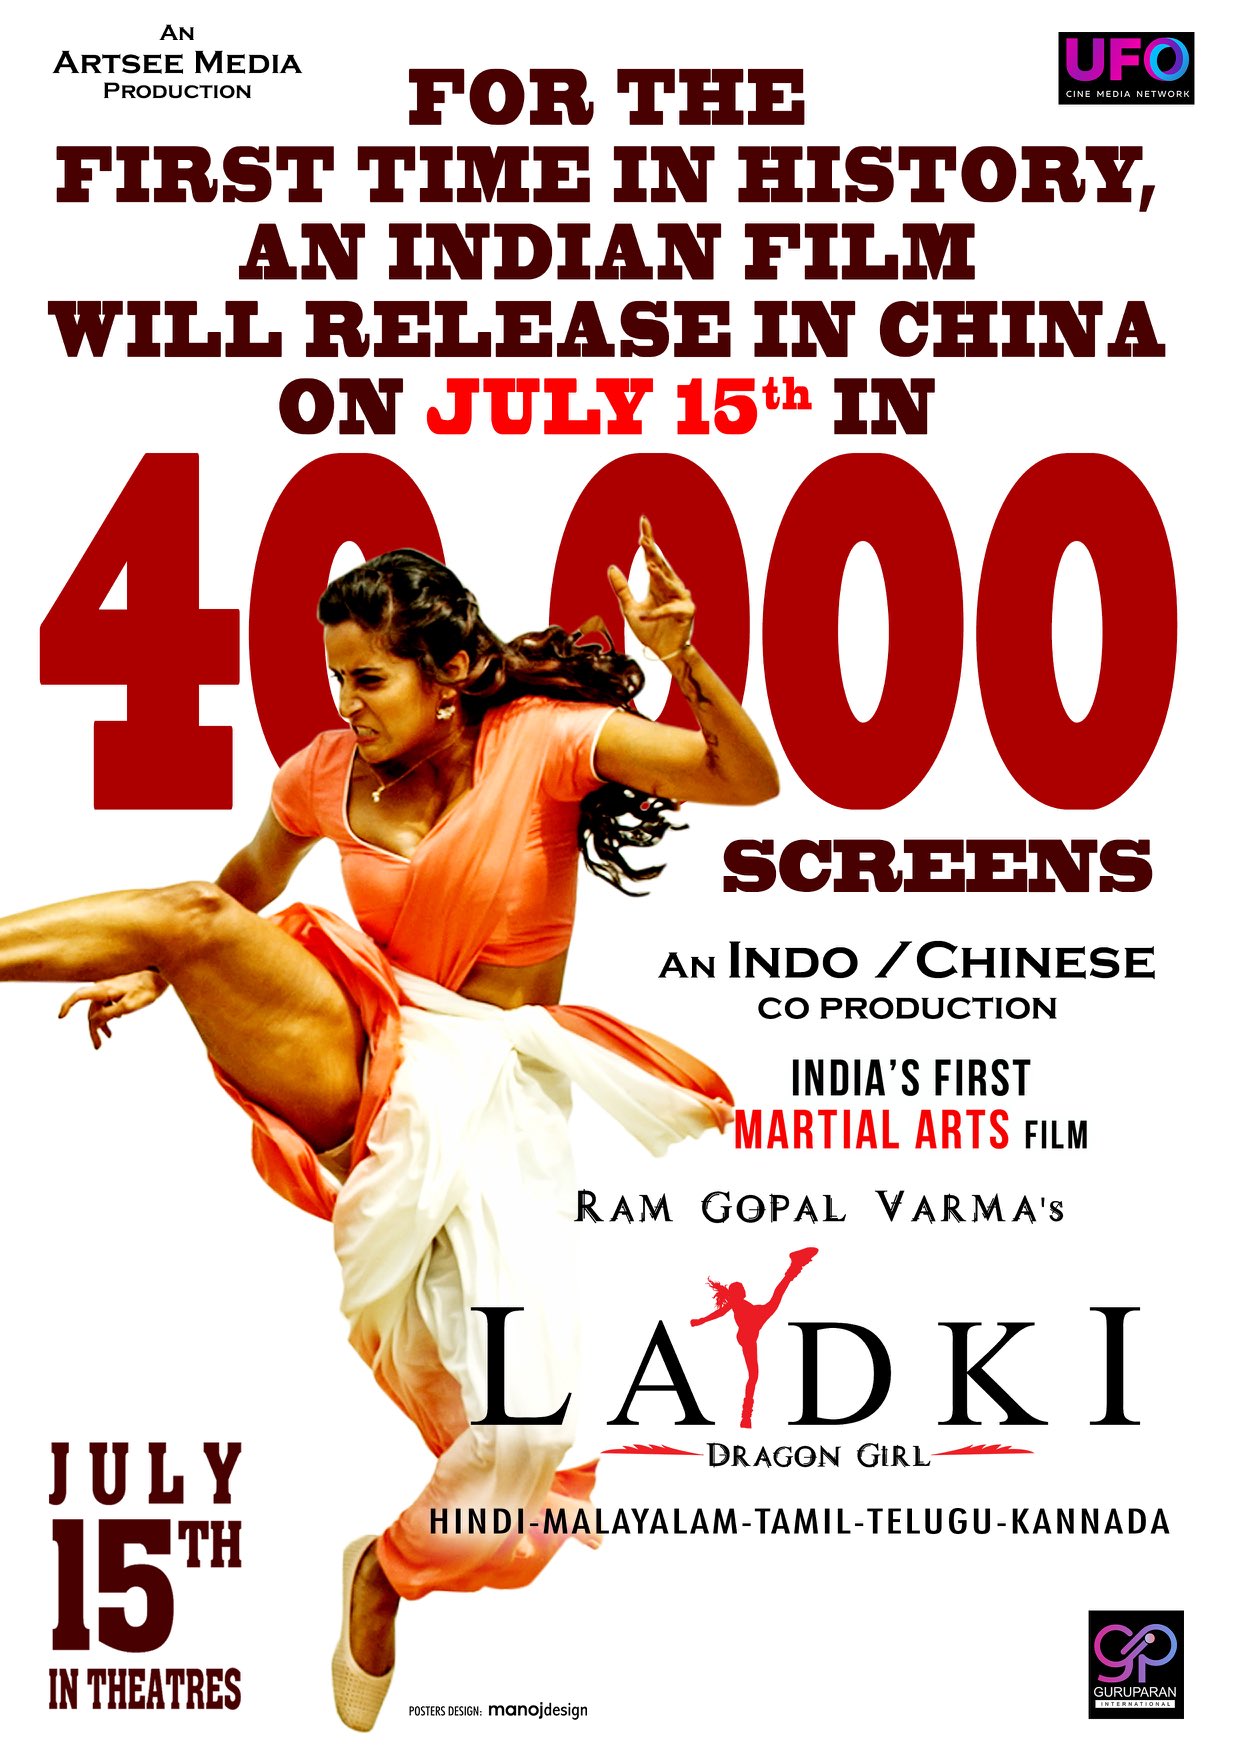 Ram Gopal Varma on Twitter: "LADKI featuring martial artiste  @PoojaBofficial will be the 1st Indian film to have a humongous release in  China ..it will be in a minimum of 40,000 screens